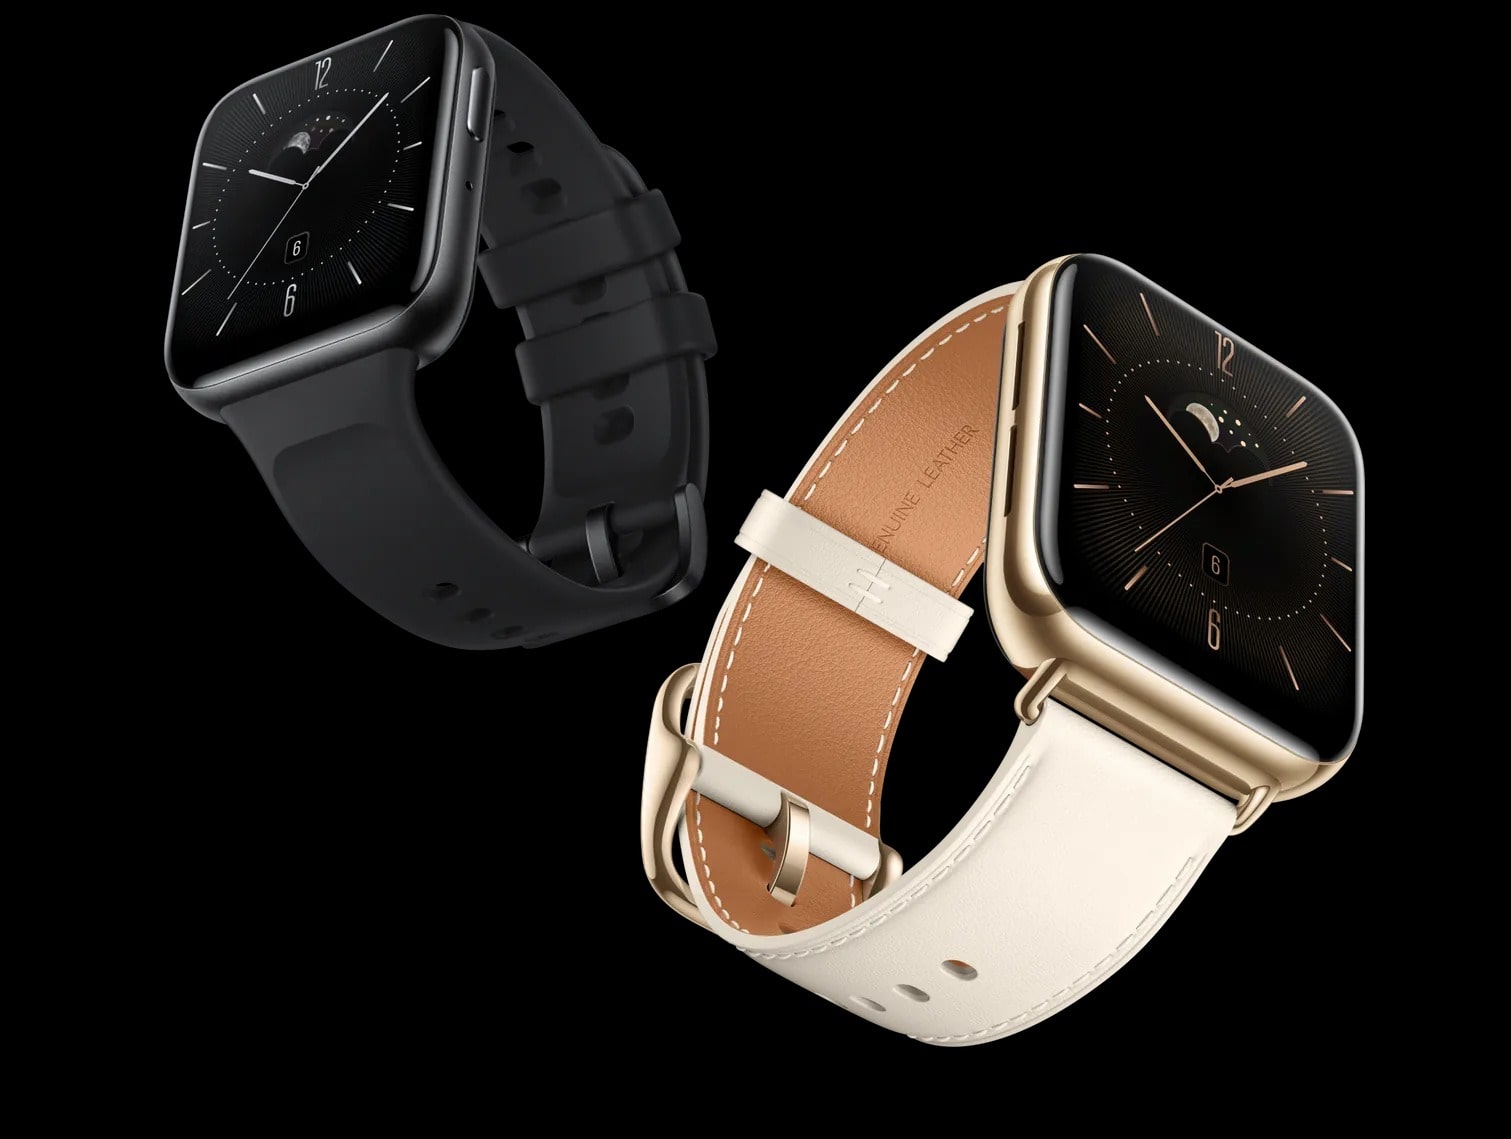 OPPO Watch Wear OS-powered smartwatch launches - Android Authority